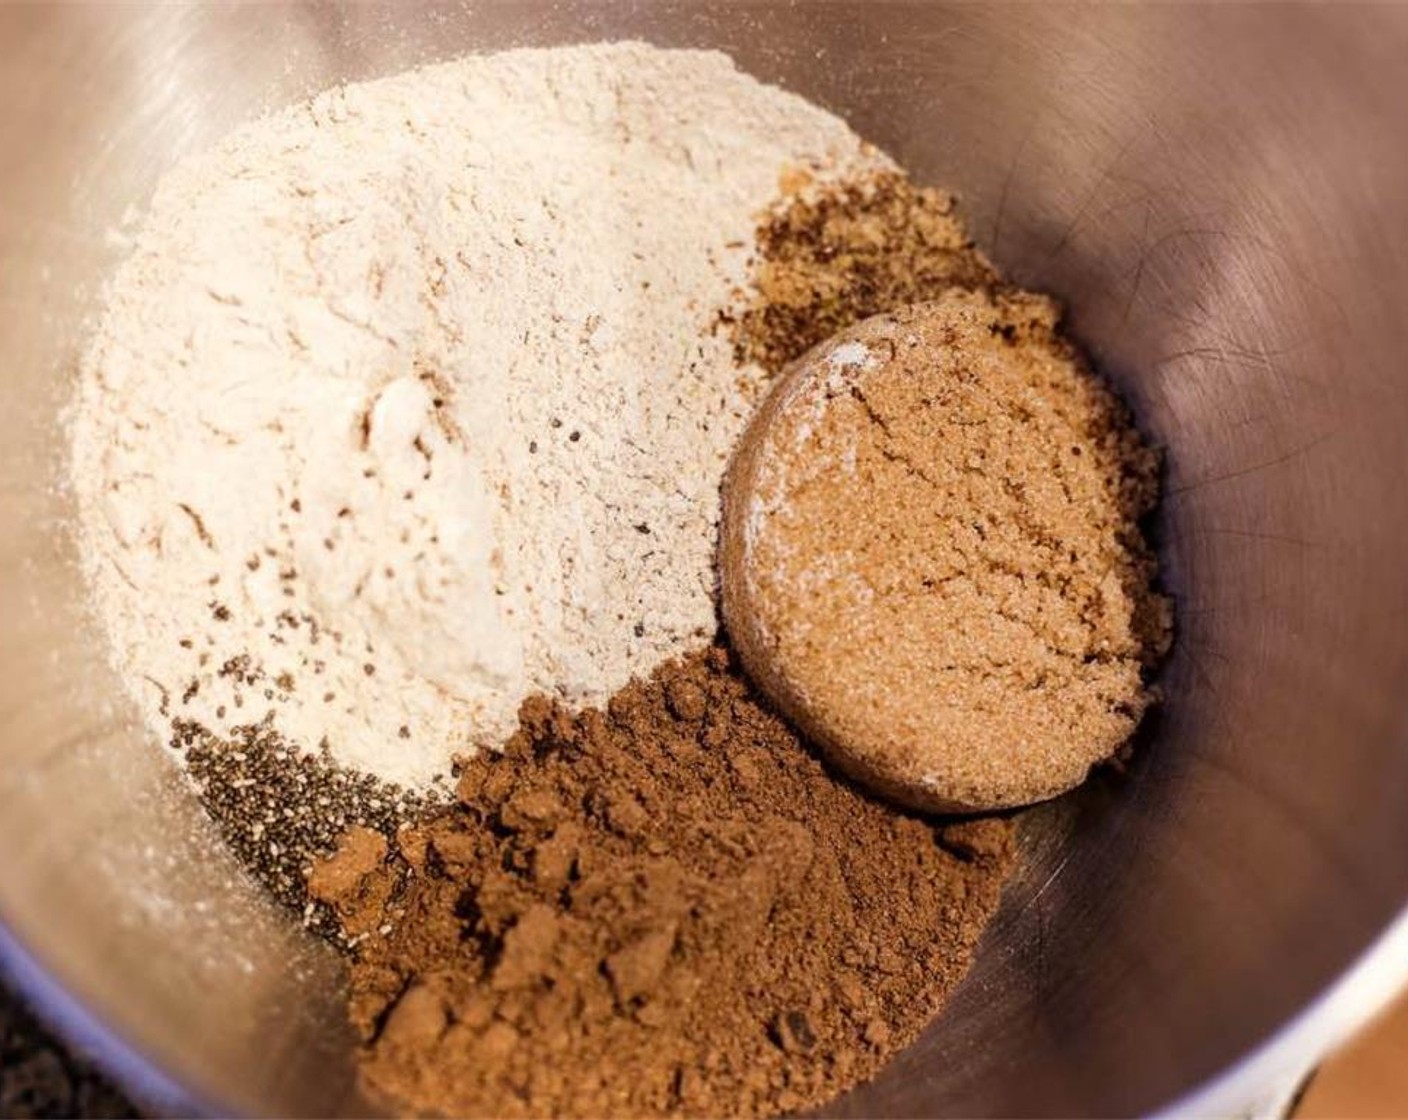 step 3 In a separate bowl, mix together Whole Wheat Flour (2 cups), Brown Sugar (1 cup), Baking Soda (3 Tbsp), Unsweetened Cocoa Powder (1 cup), Protein Powder (1/2 cup) and Chia Seeds (2 Tbsp).